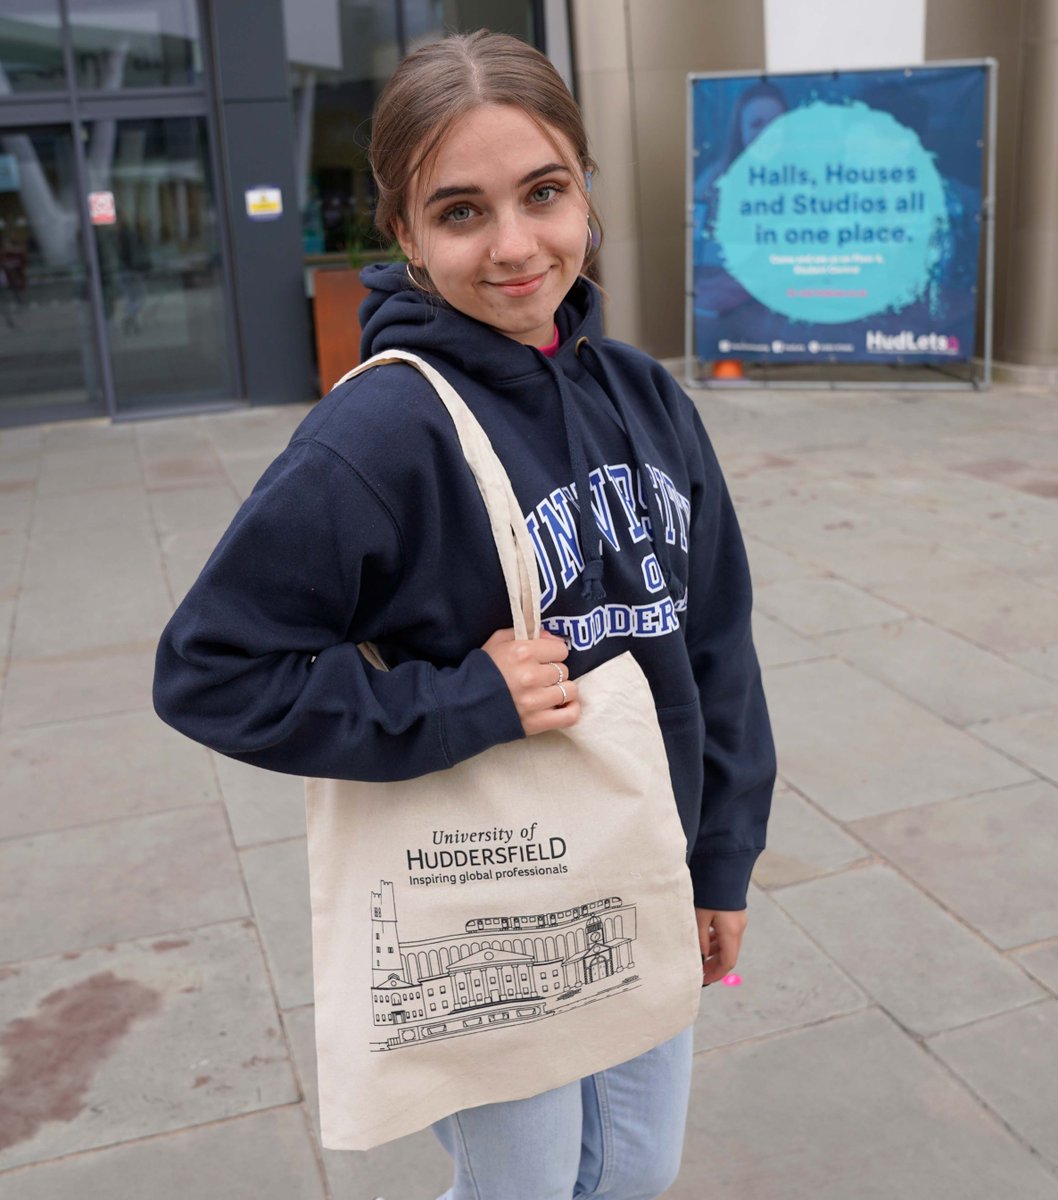 This tote-ally fabulous tote bag is perfect for campus life! Not only does it show off your university pride, but it also adds a stylish touch to your look. Get yours today by clicking on the link: huddersfieldsu.shop #HudSU #HudUni